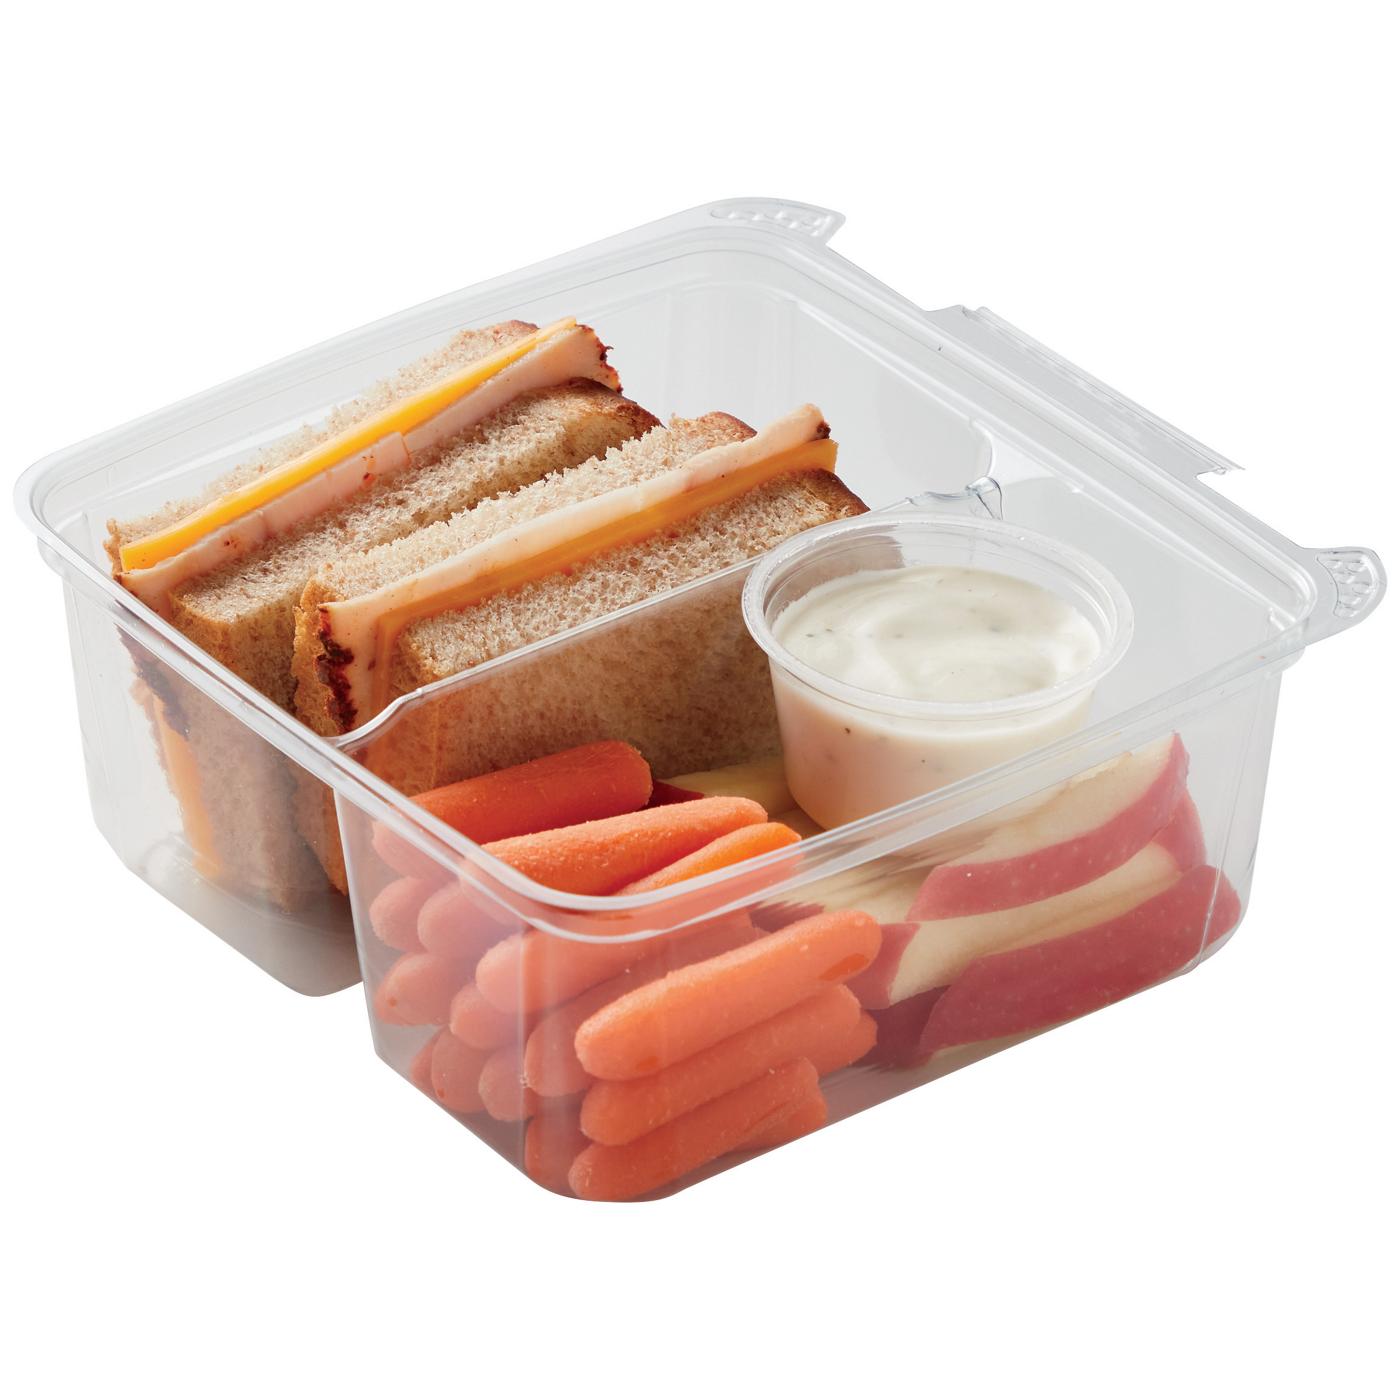 Meal Simple by H-E-B Kids' Turkey & Cheese Sandwich with Apple